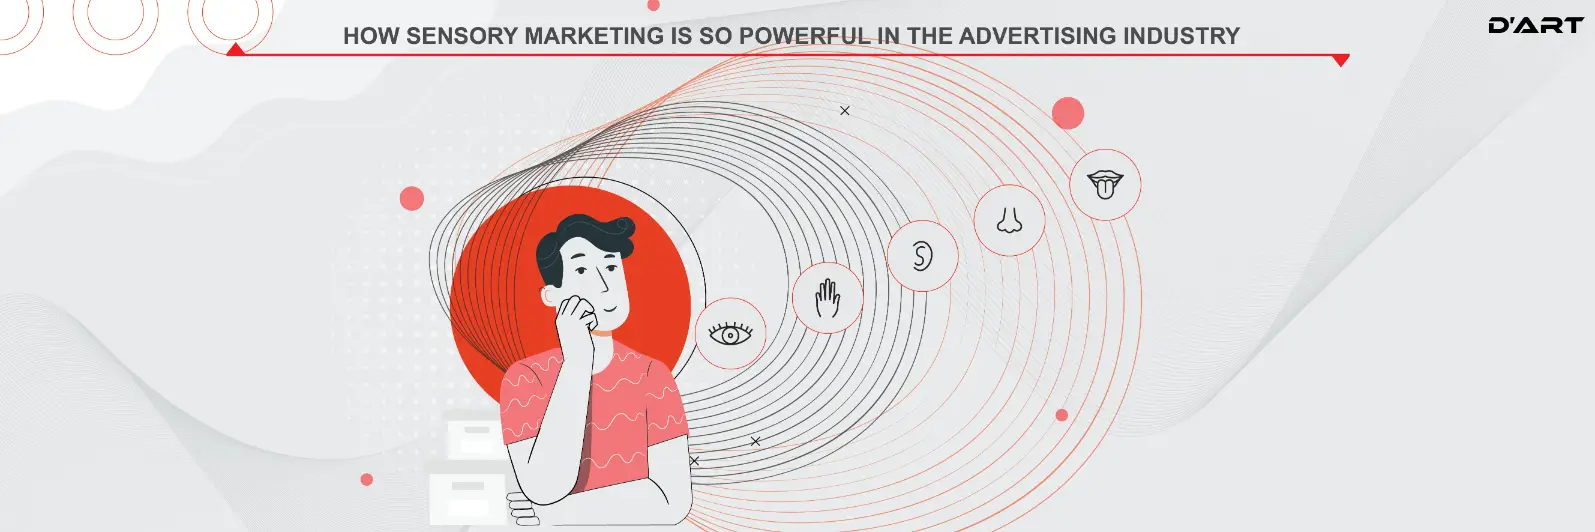 HOW SENSORY MARKETING IS SO POWERFUL IN THE ADVERTISING INDUSTRY